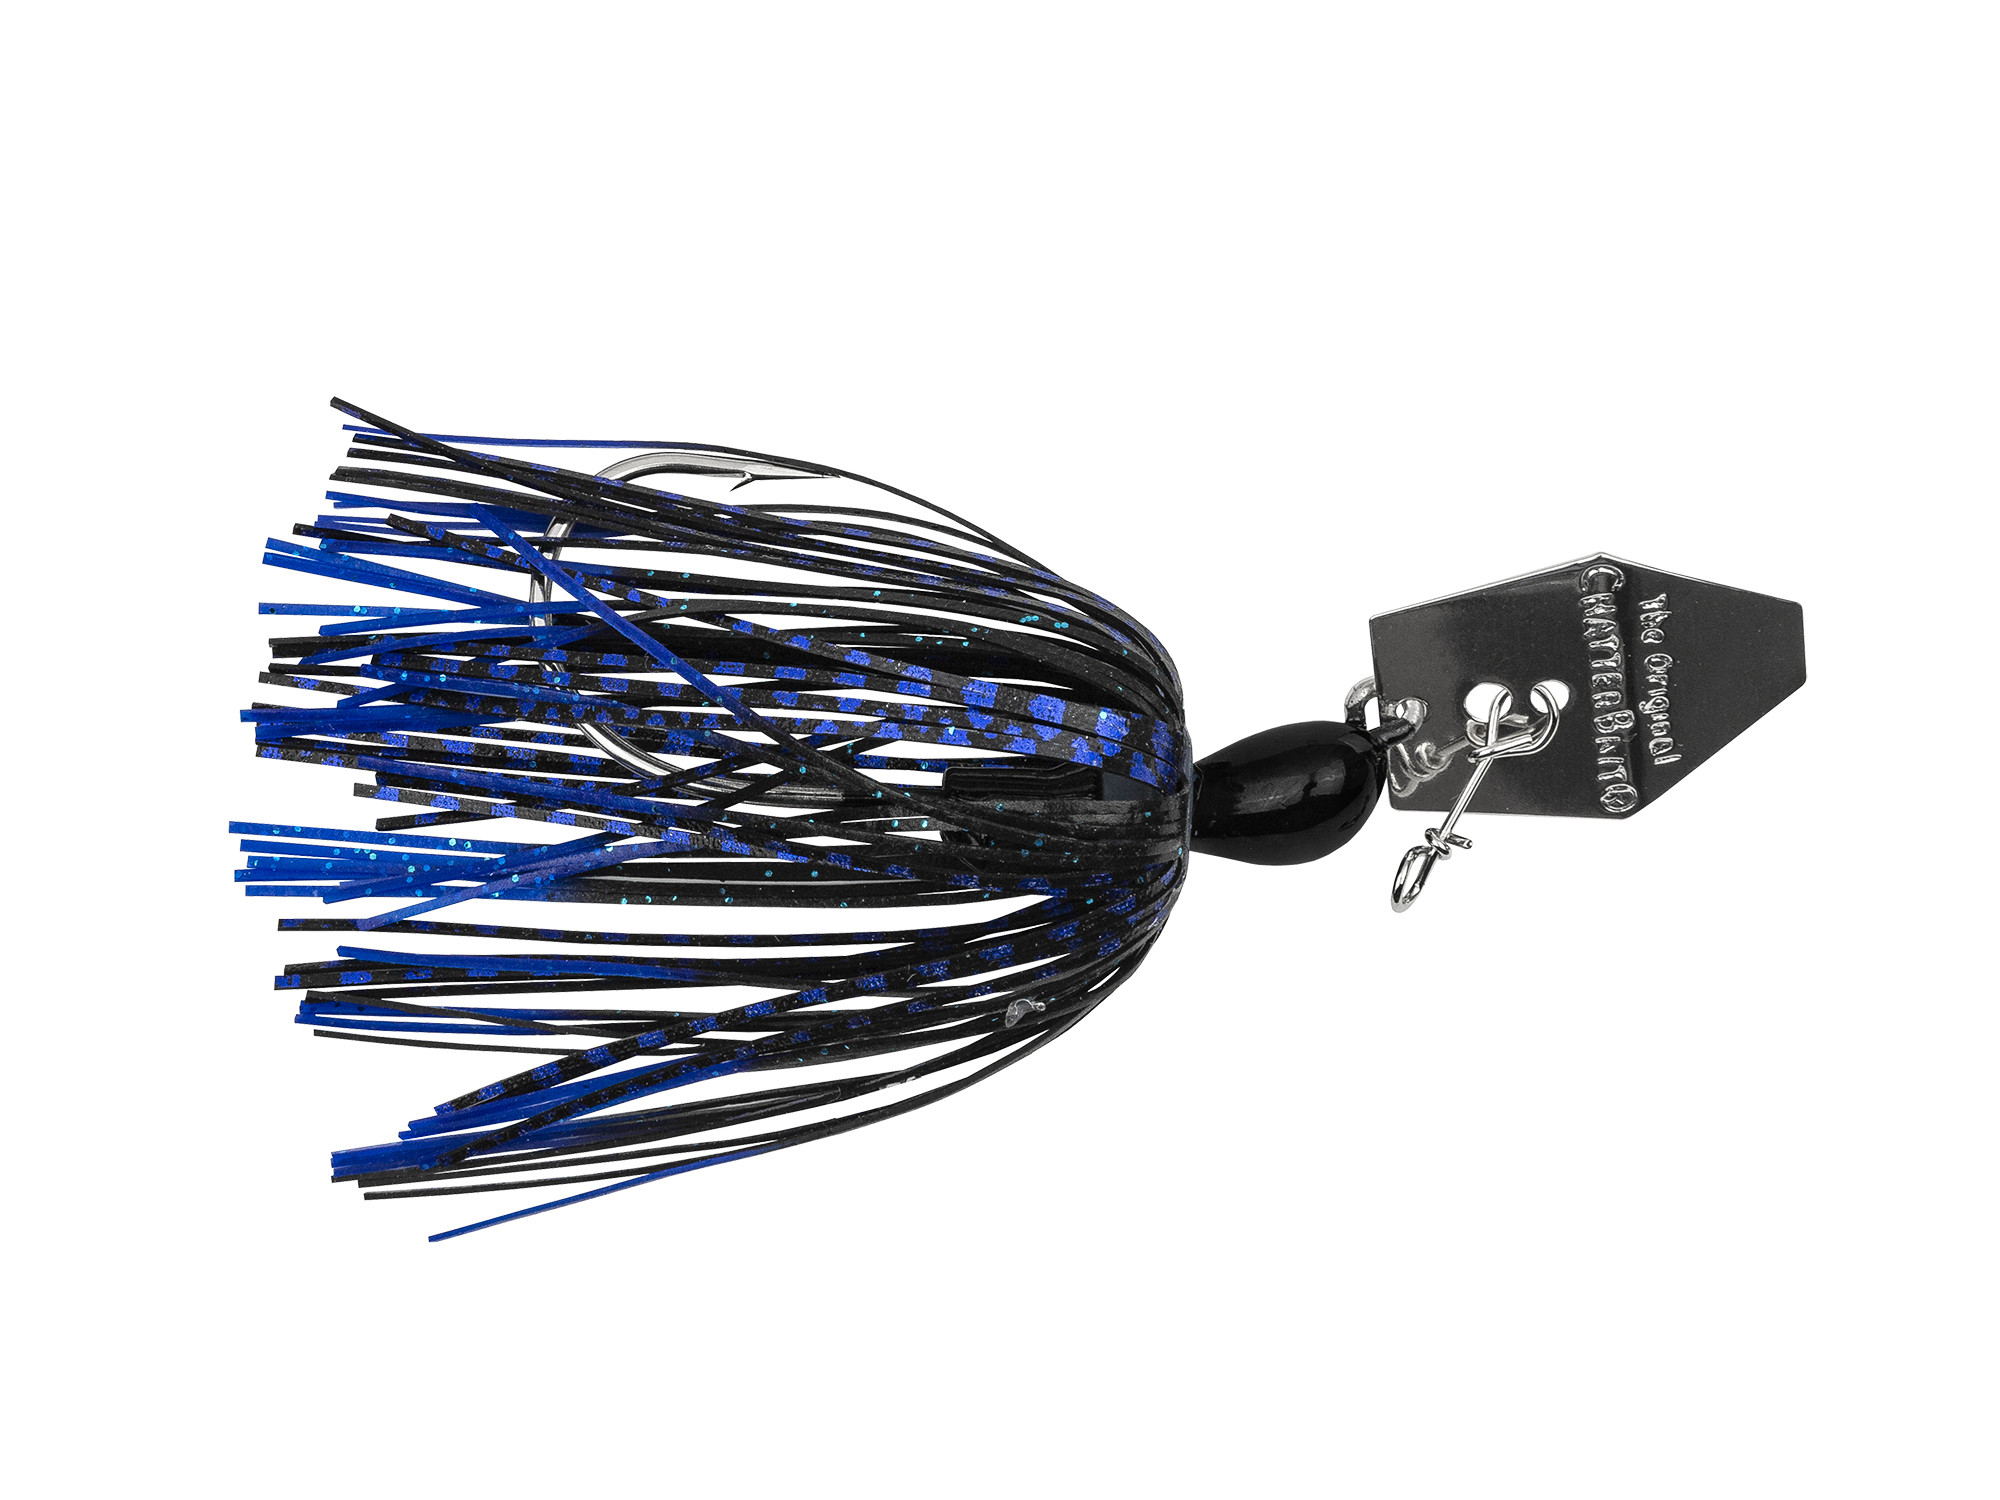 Help with this Chatterbait color - Fishing Tackle - Bass Fishing